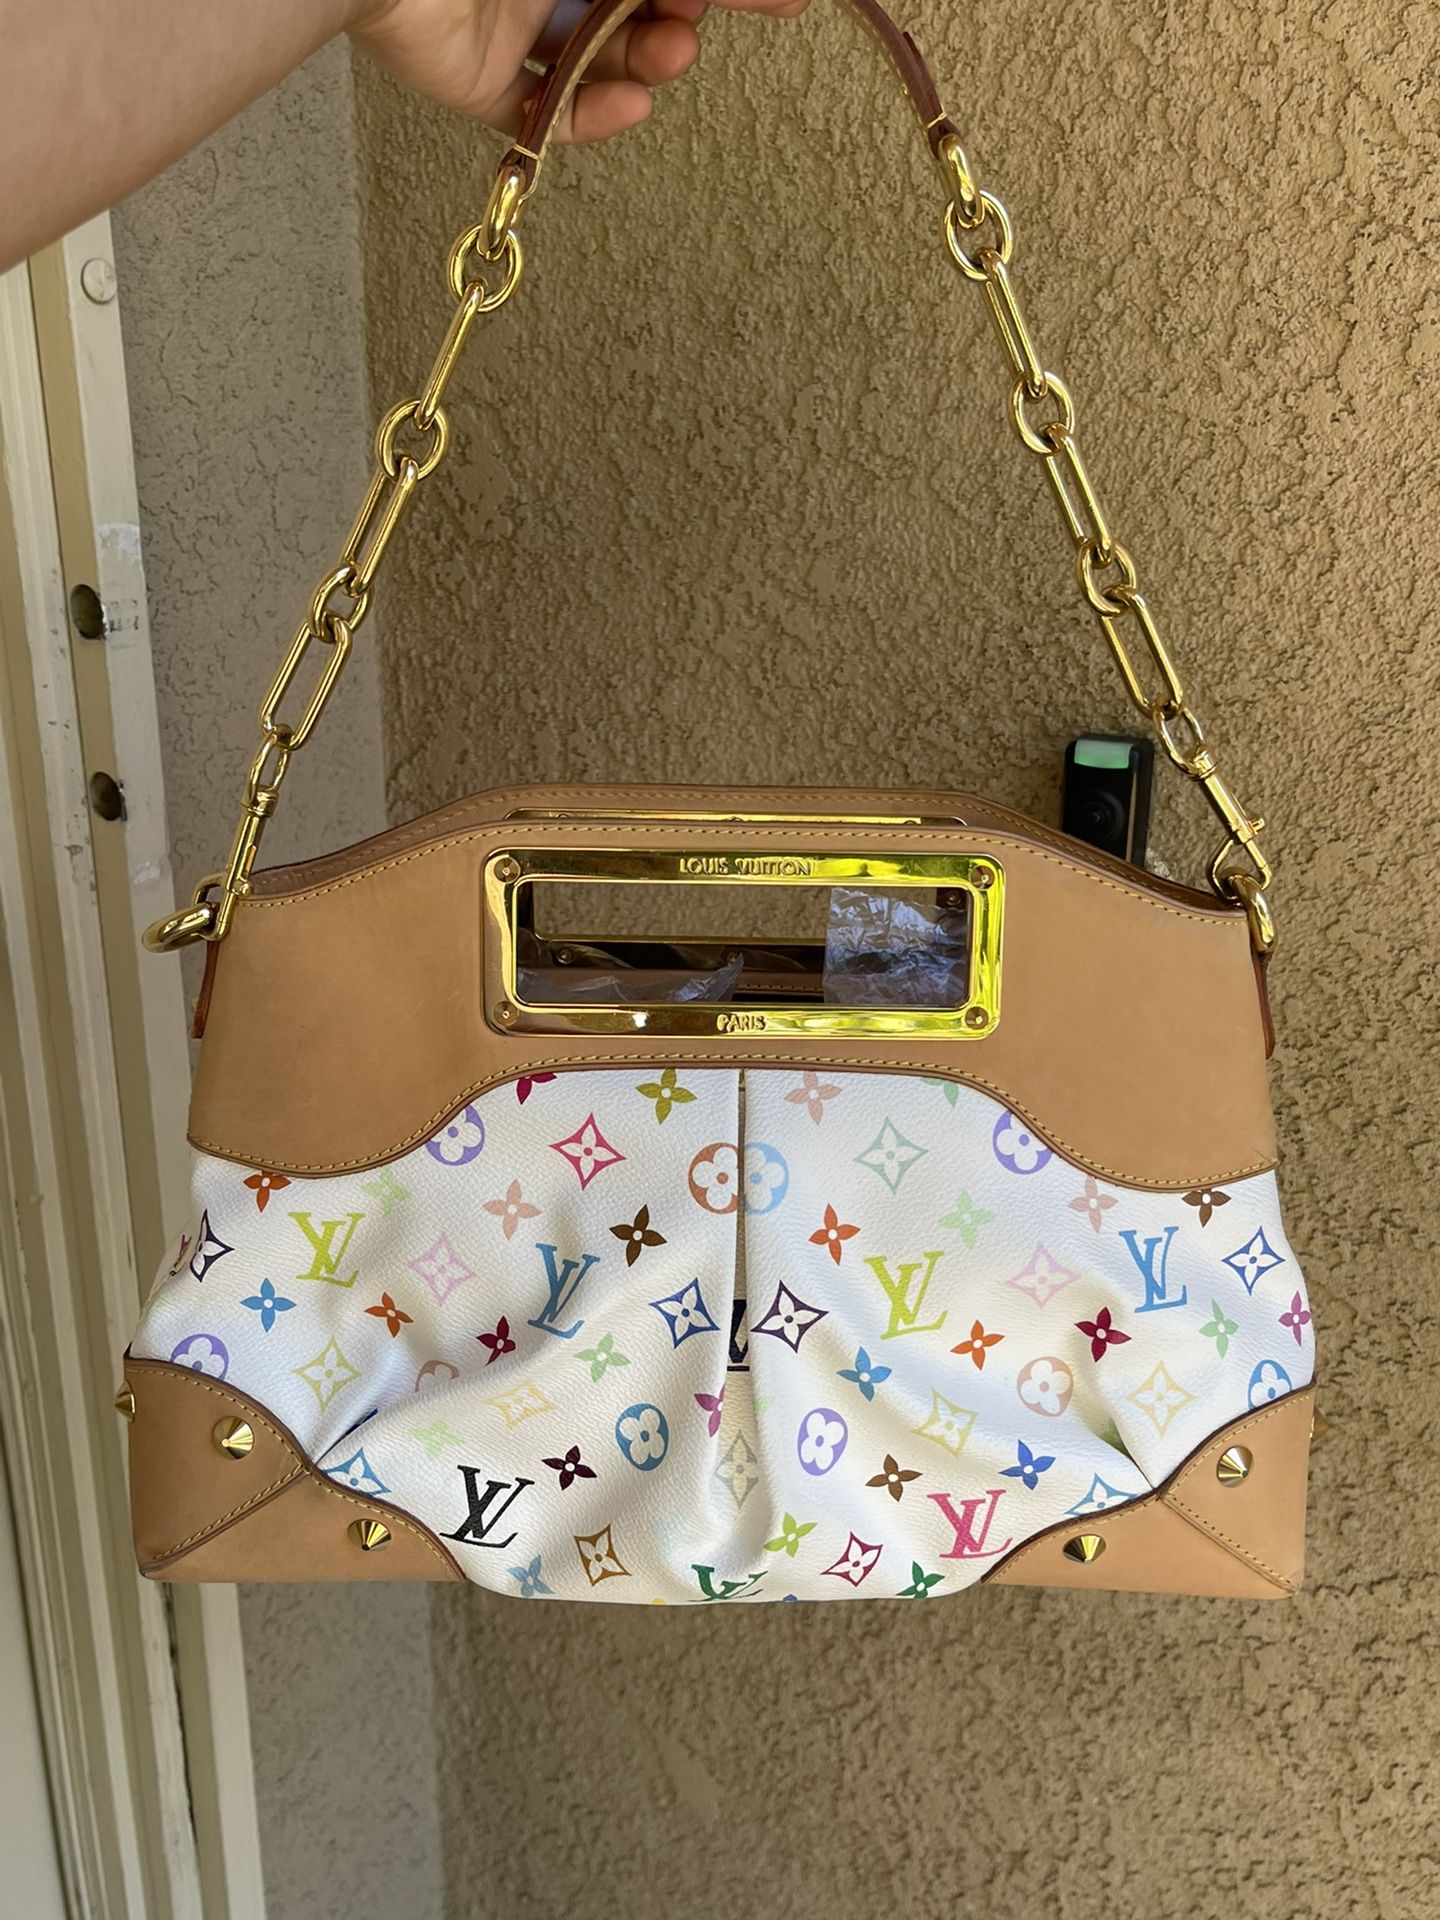 Louis Vuitton Judy mm Multicolor white for Sale in Indio, CA - OfferUp